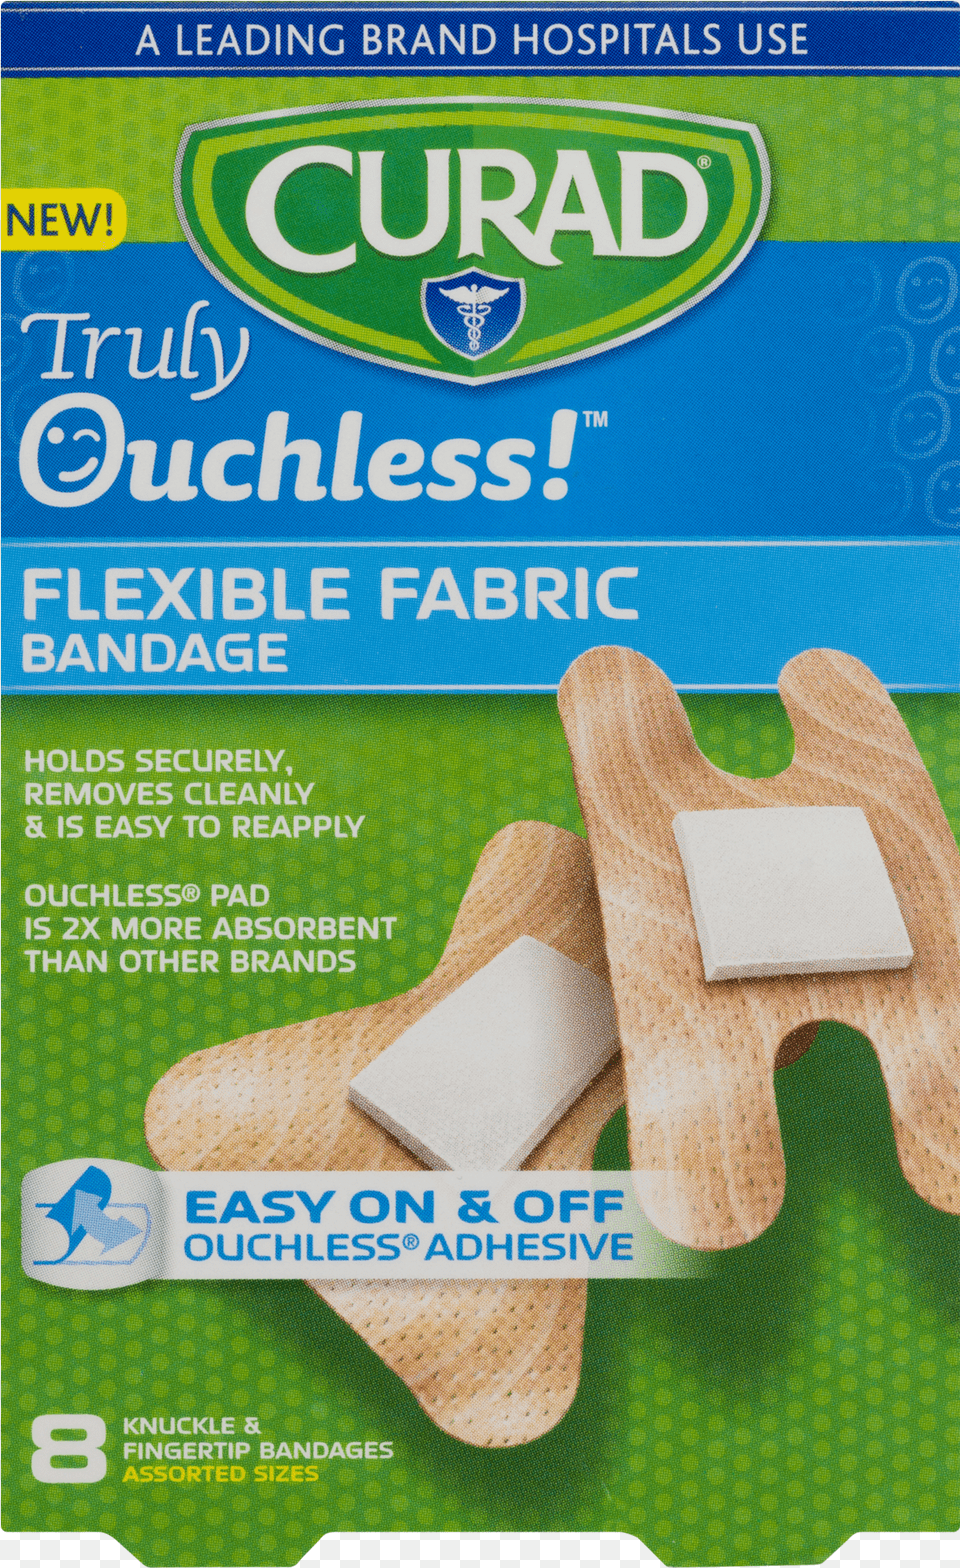 Curad Truly Ouchless Flexible Fabric Bandages Png